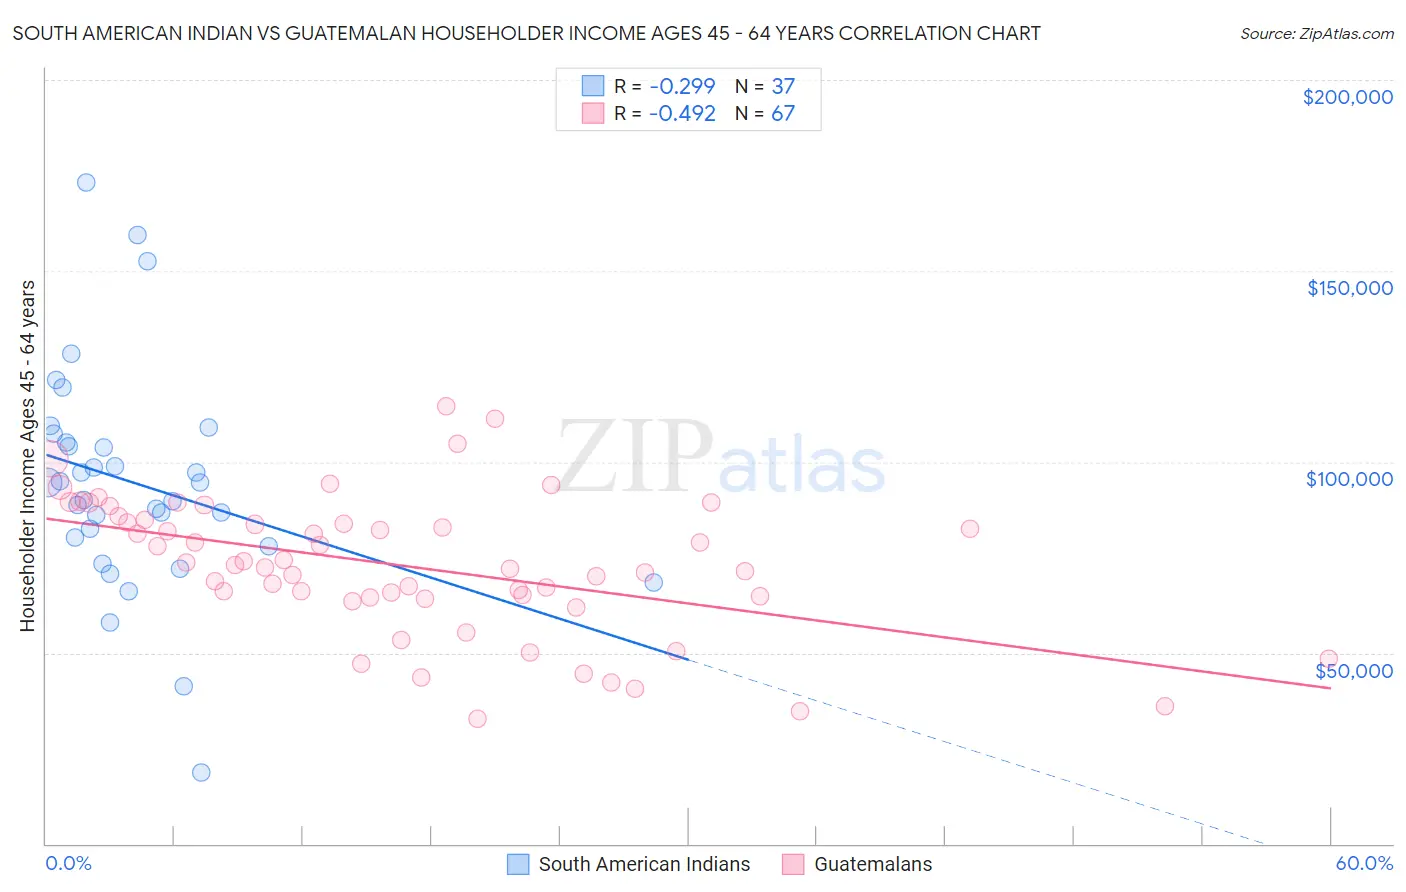 South American Indian vs Guatemalan Householder Income Ages 45 - 64 years